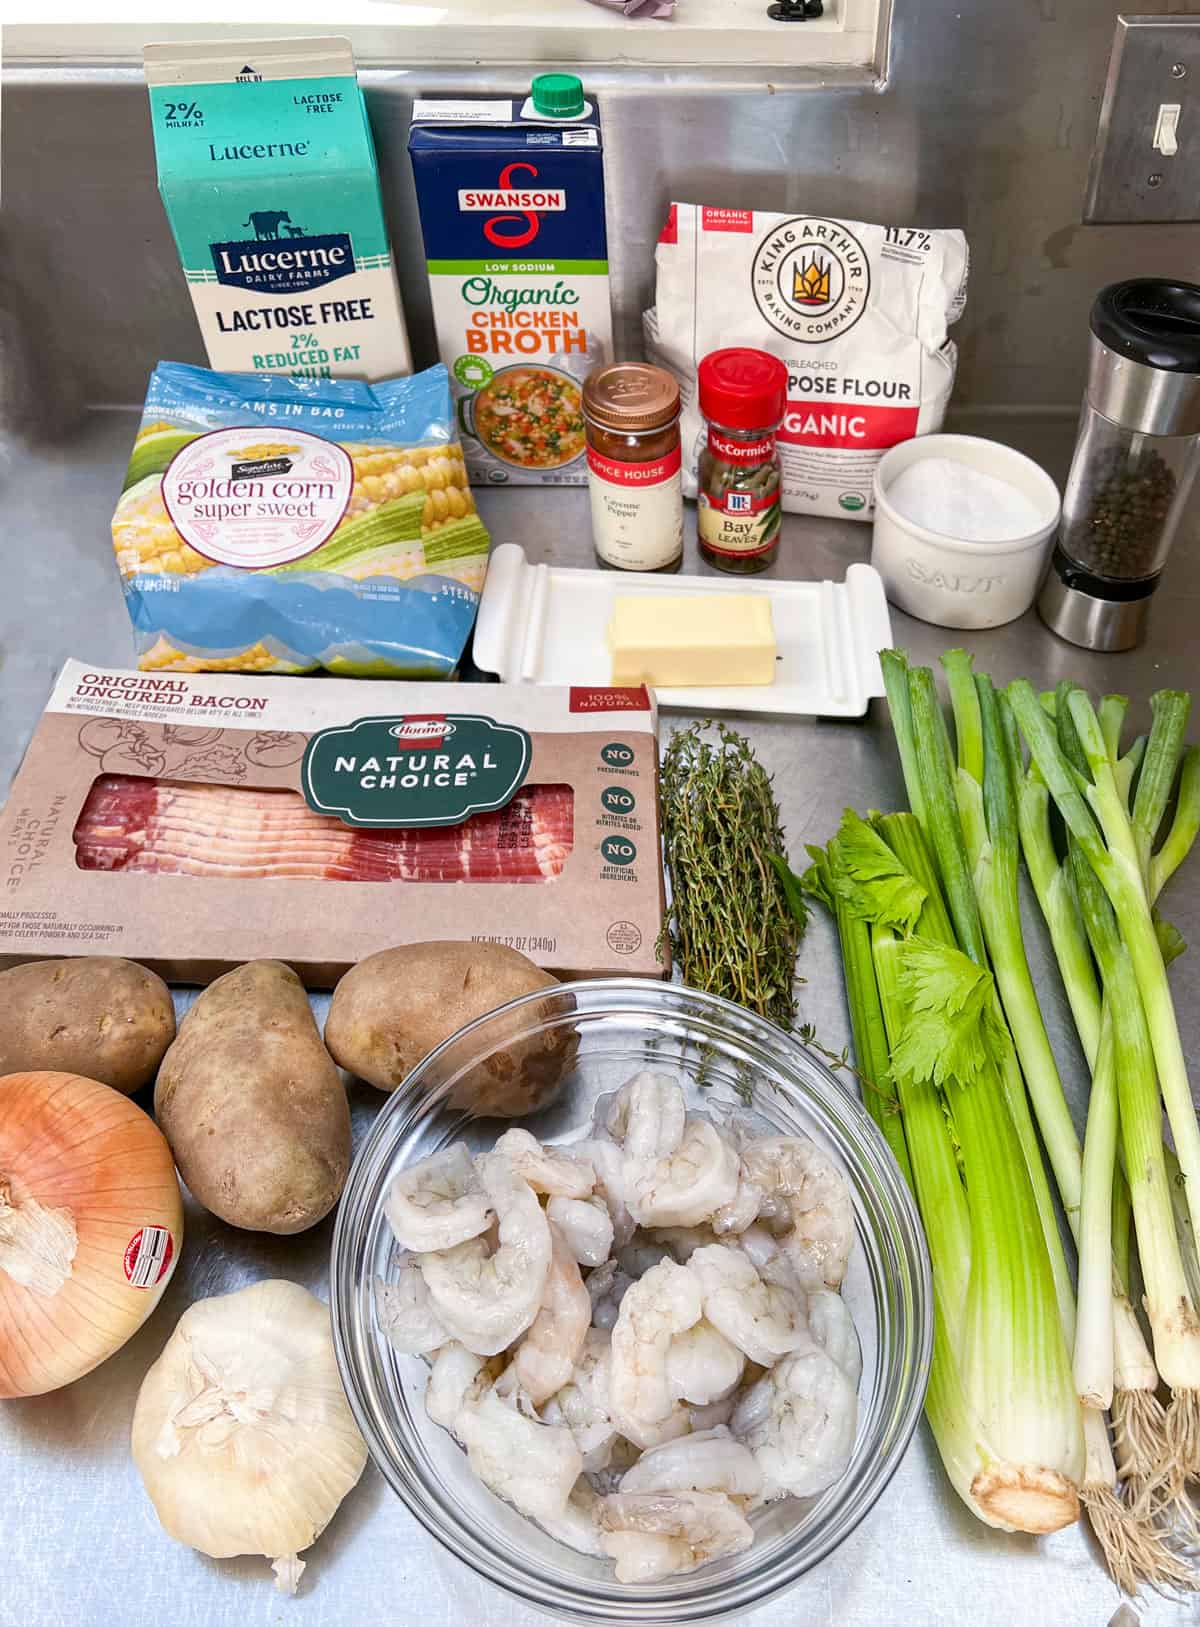 Ingredients on a stainless steel counter: bowl of raw shrimp, bunch of celery, bunch of scallions, 3 russet potatoes, an onion, a bulb of garlic, a pack of bacon, some fresh thyme sprigs, a pack of frozen corn, a box of chicken broth, box of milk, bag of four, butter, salt cellar, pepper grinder, bottle of bay leaves, bottle of cayenne pepper.